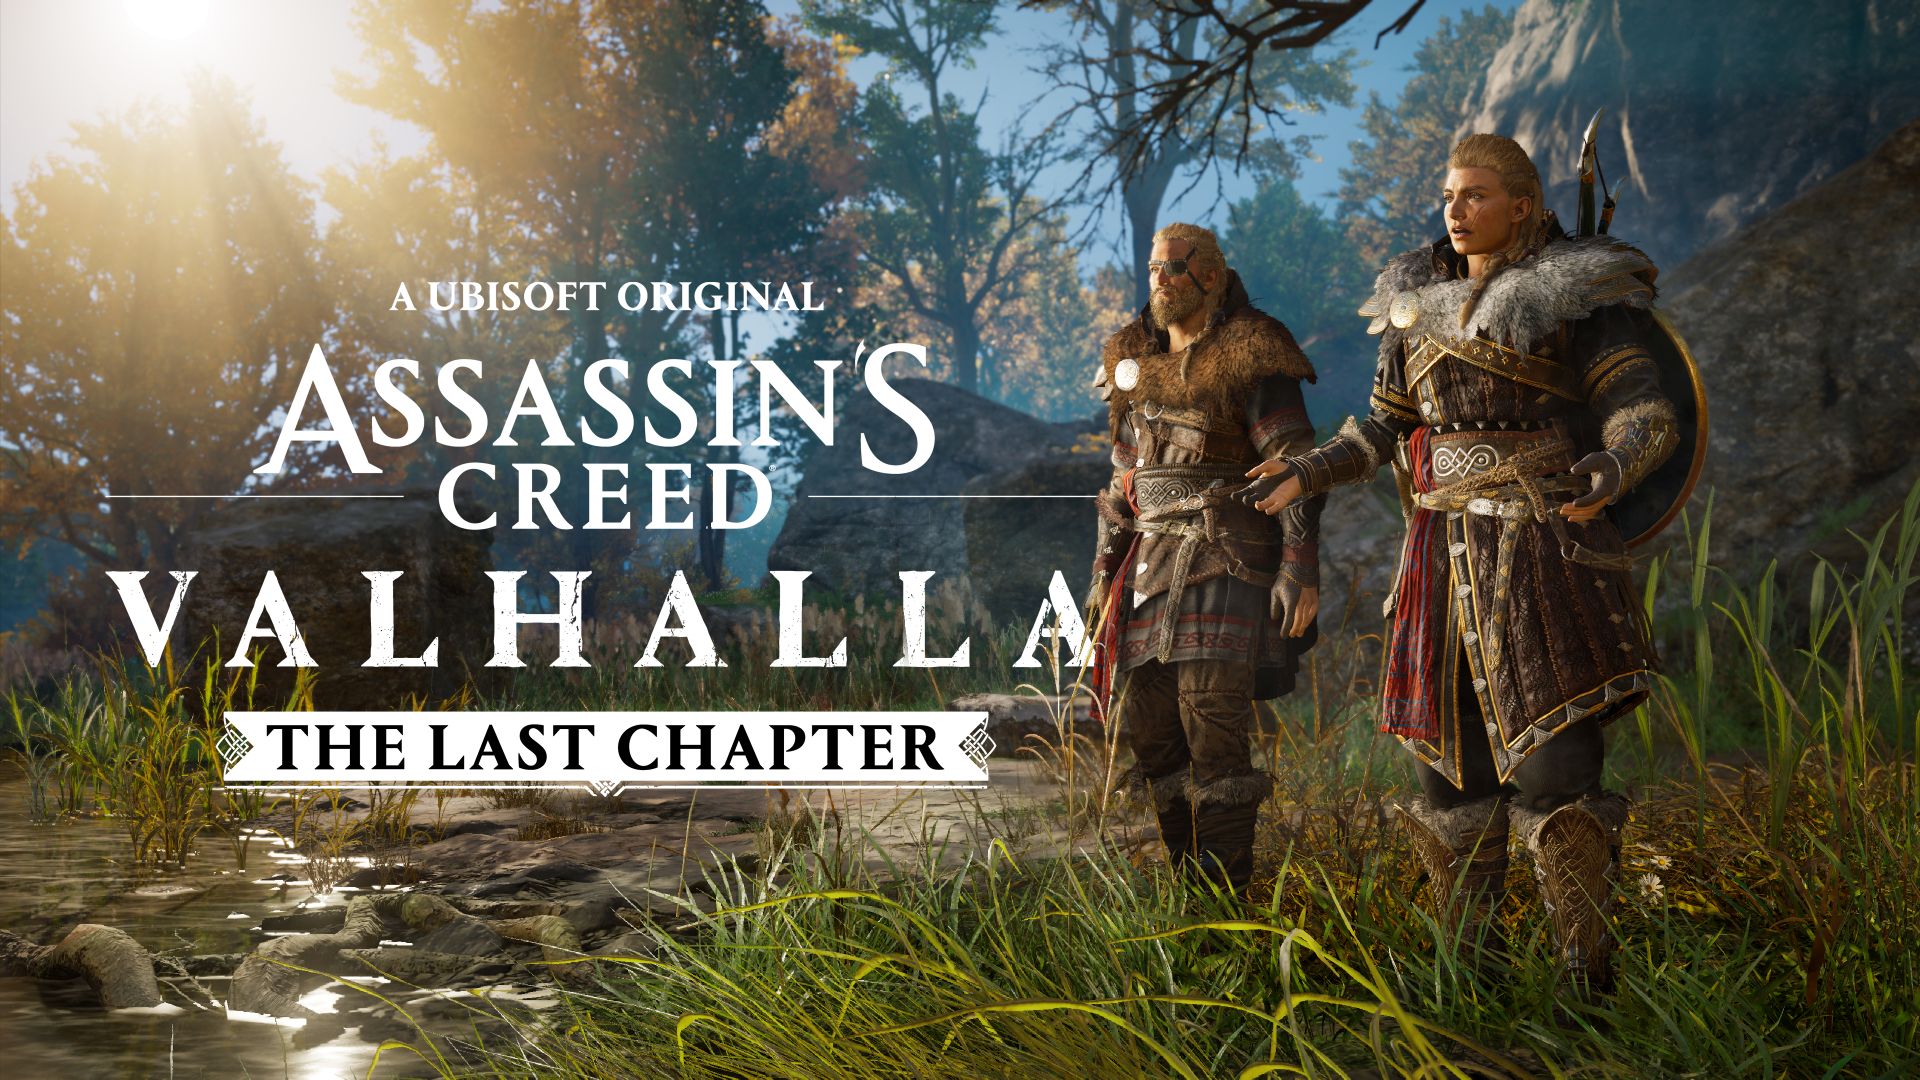 Assassin's Creed Valhalla The Last Chapter Update hero image